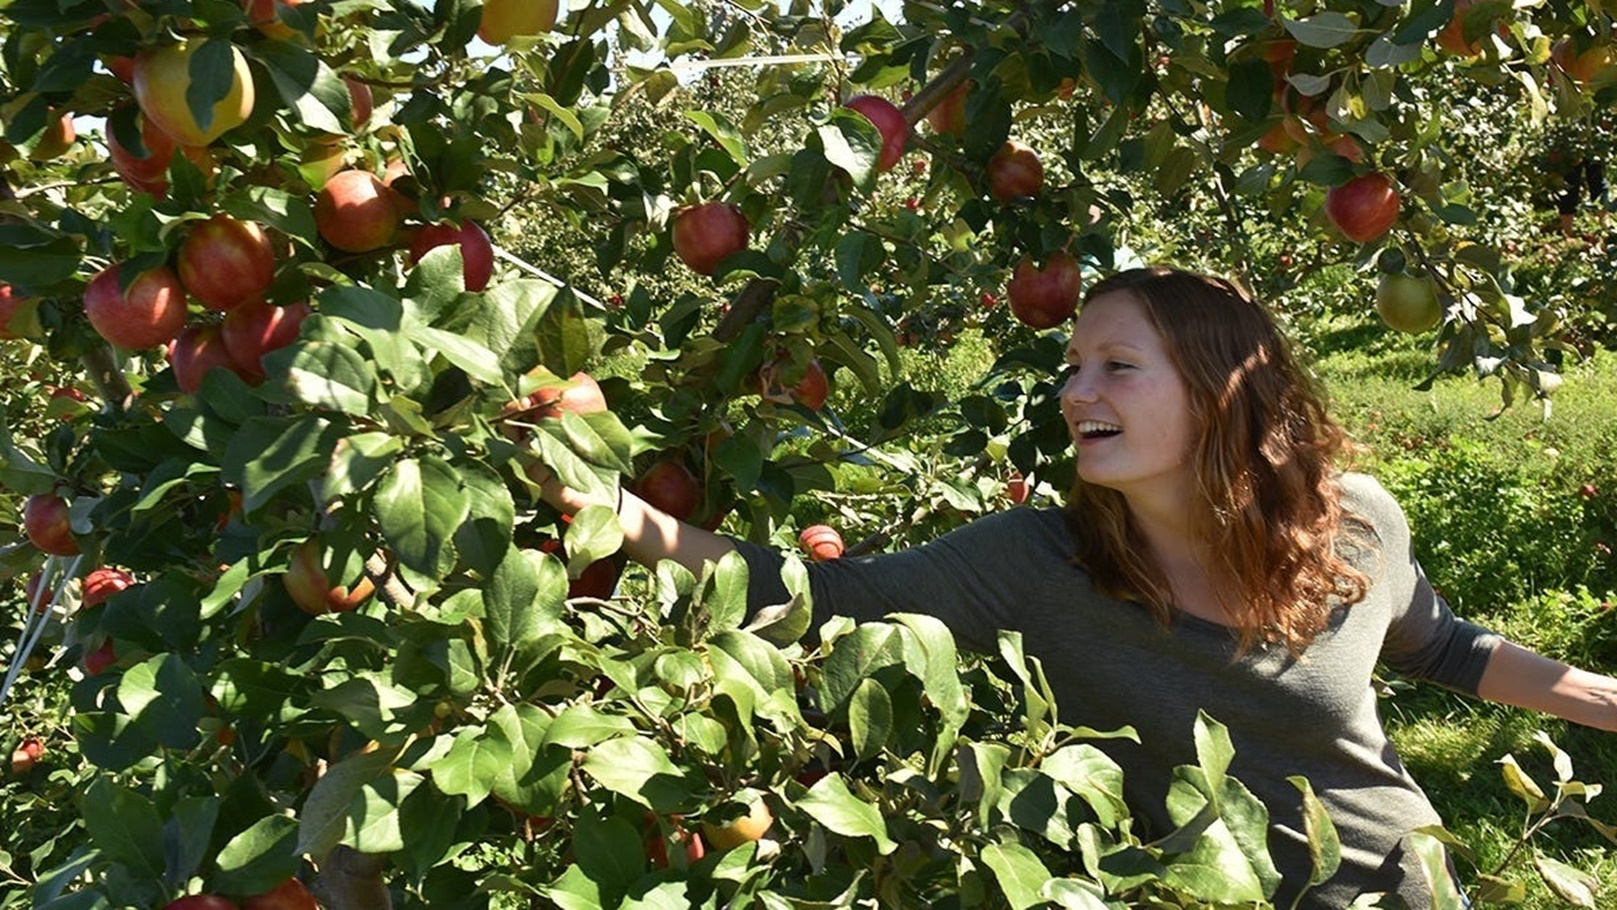 7dd43b56-598b-41f1-96d8-a6b2a07bfe17-DCA_0908_Door_County_apple_picking_Orchard_Country_16 (1)